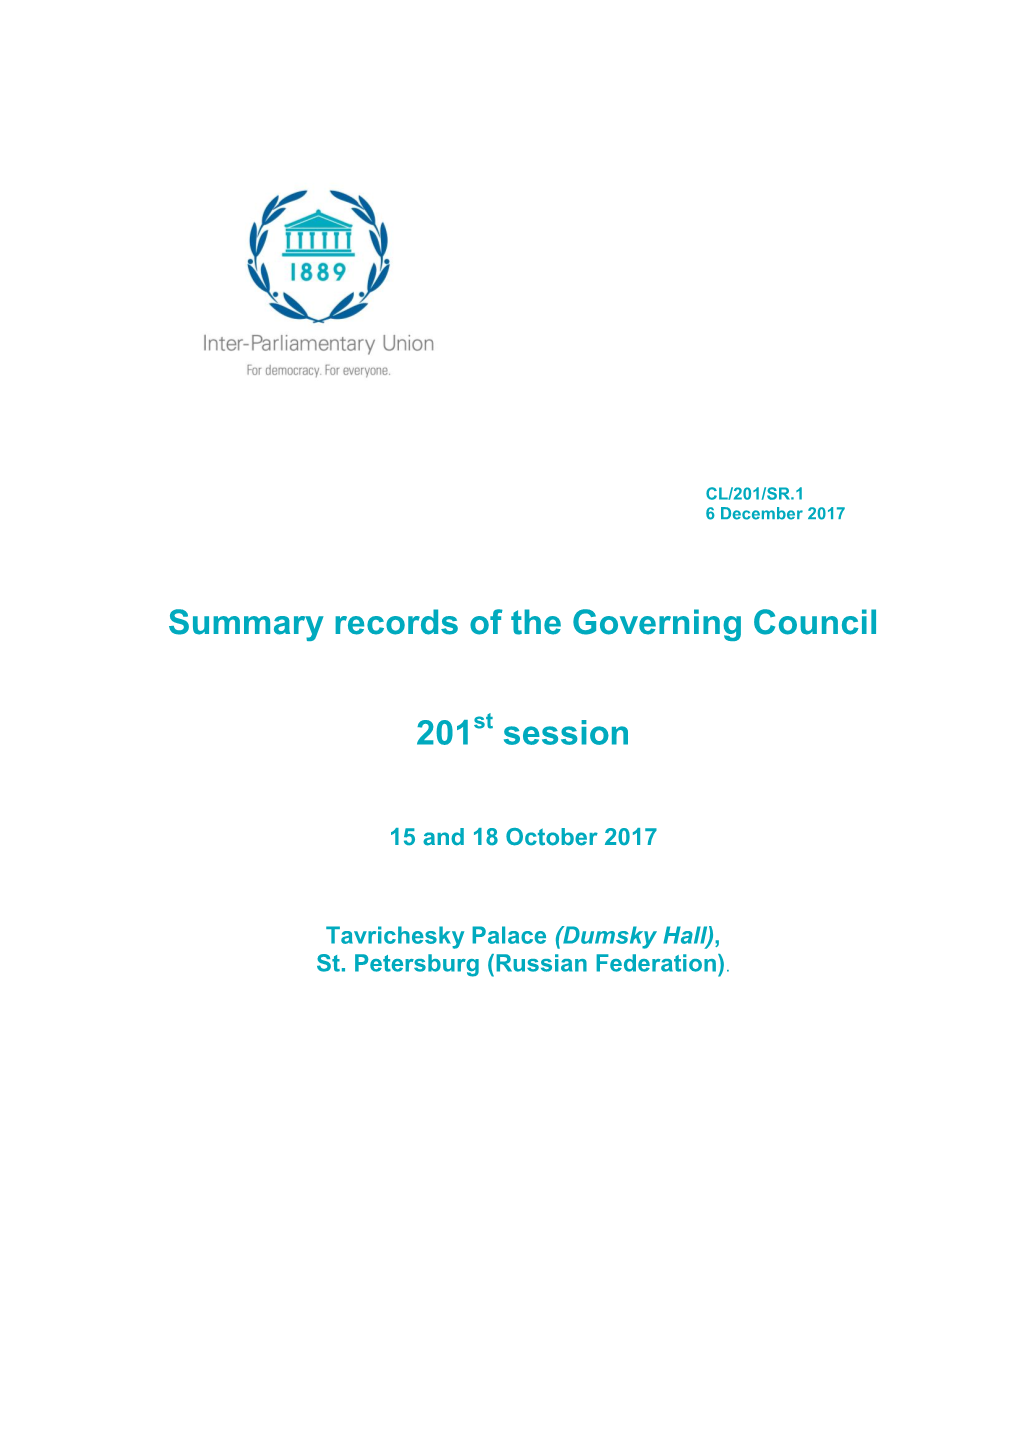 Summary Records of the Governing Council 201 Session